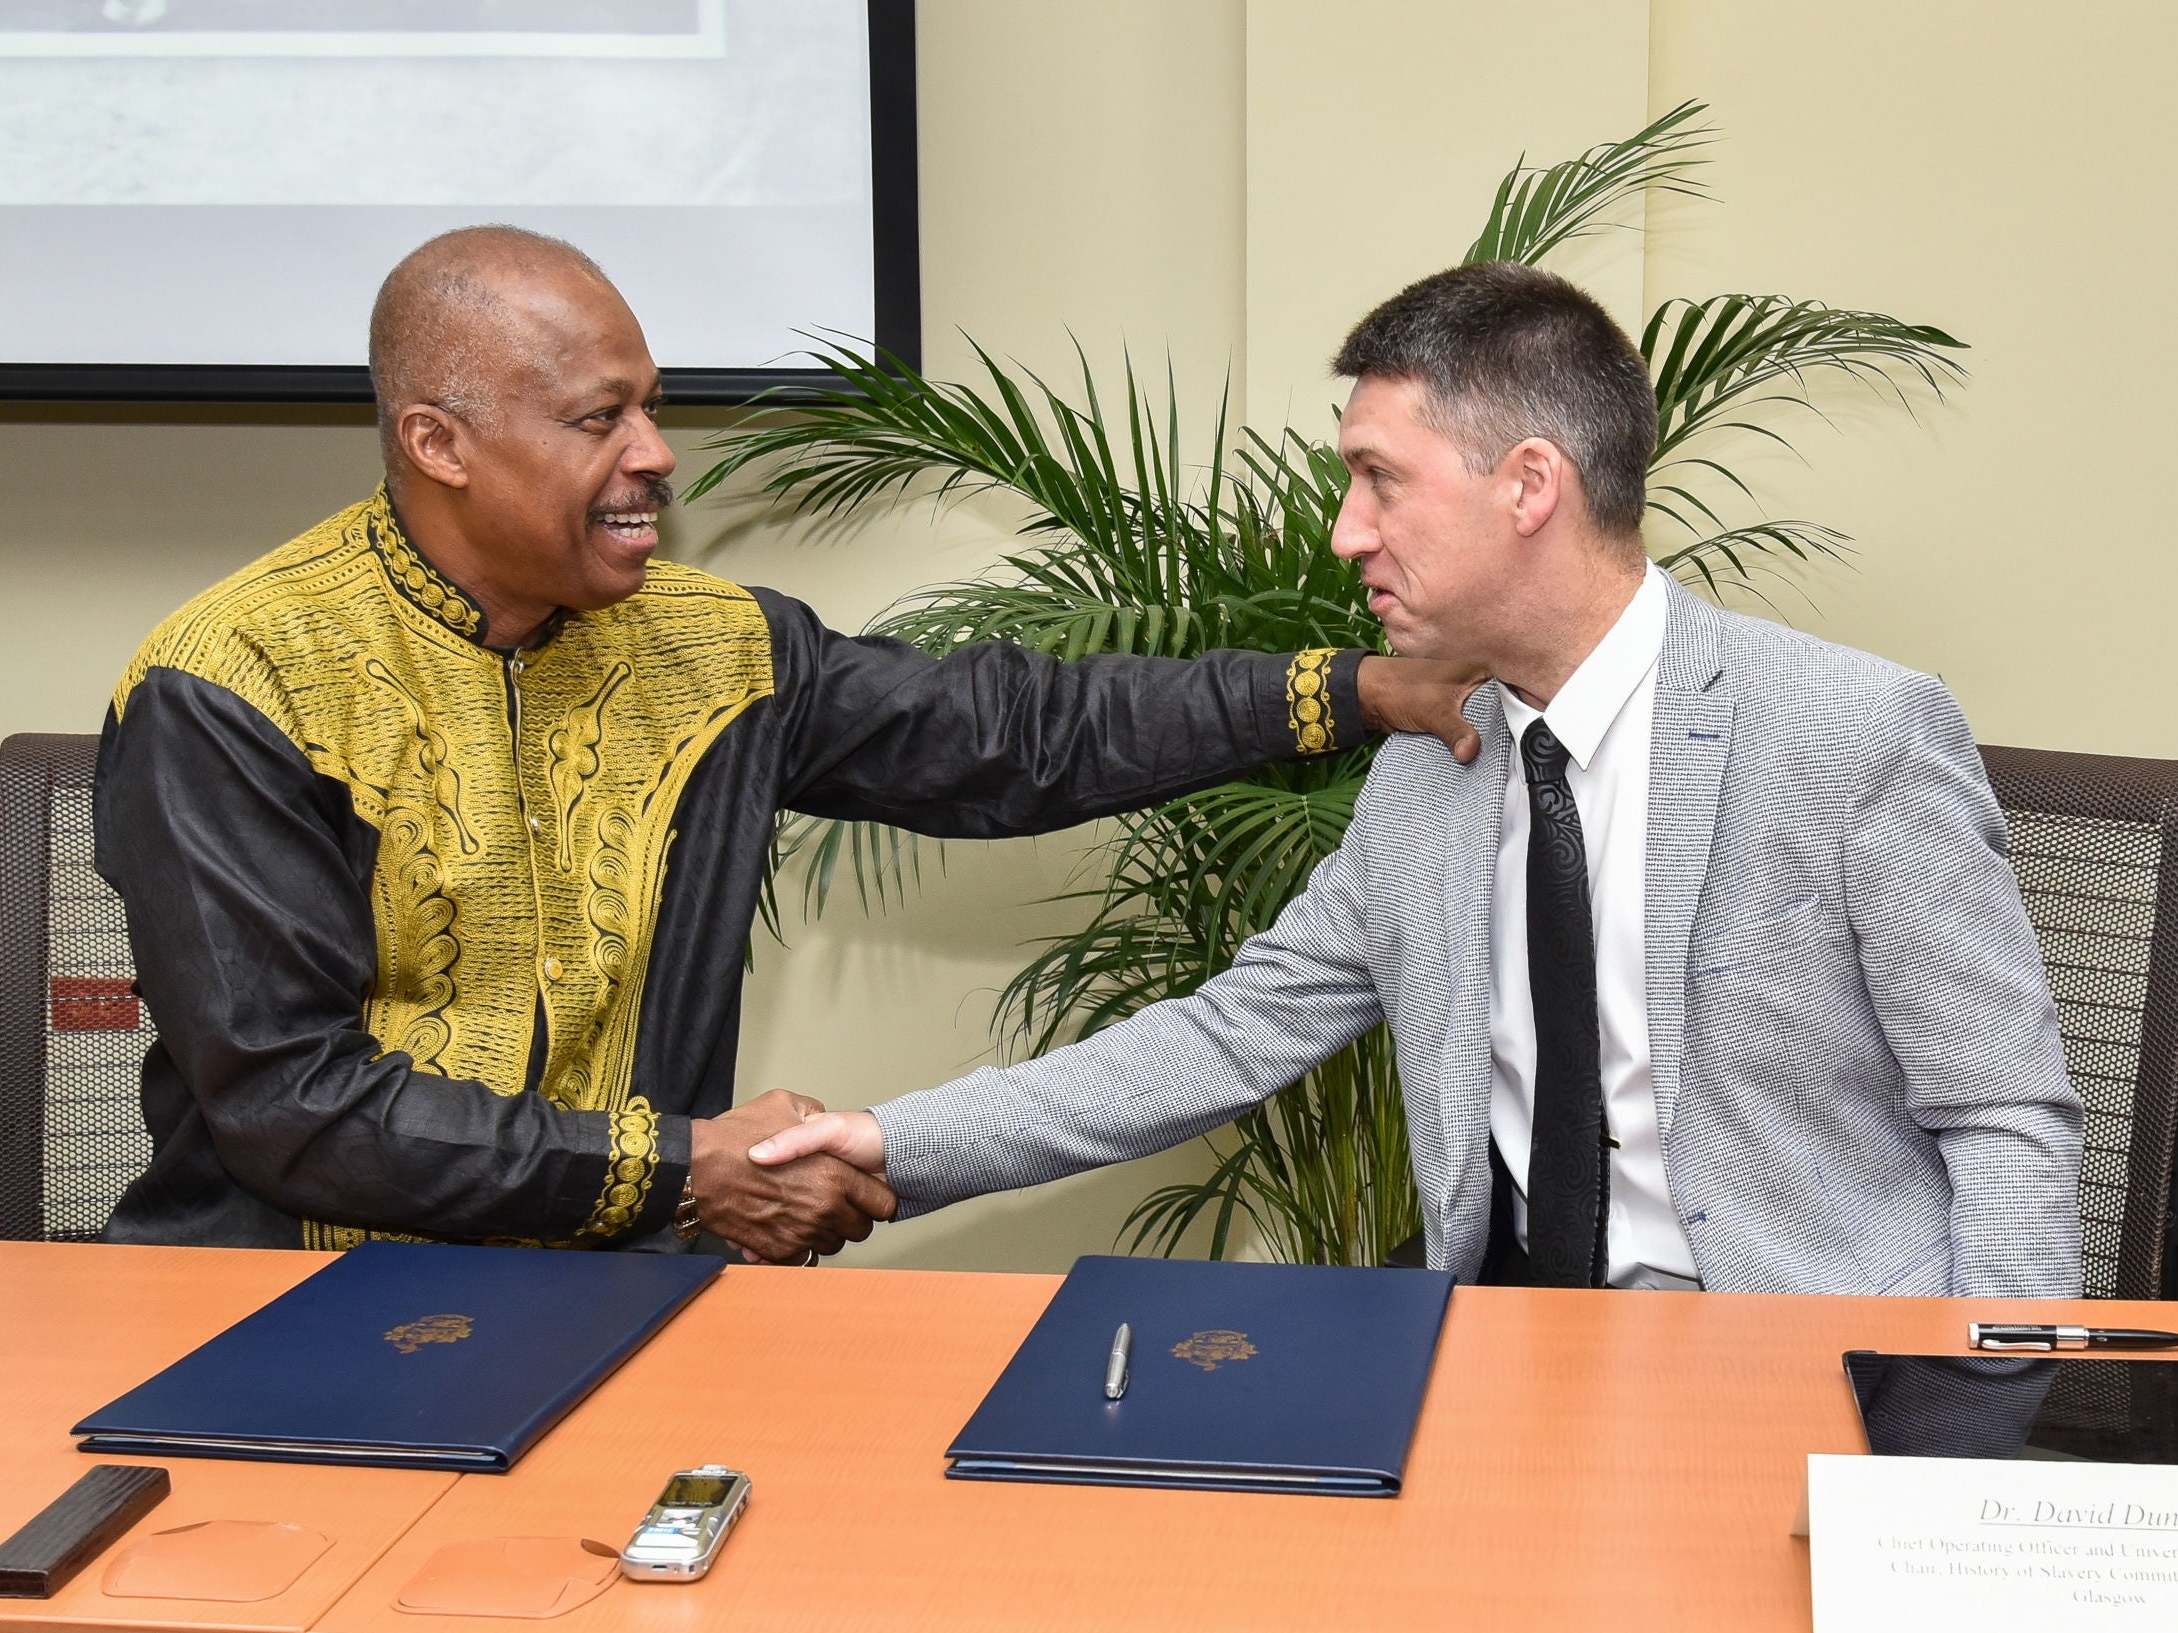 Reparations agreement: Professor Sir Hilary Beckles of the University of the West Indies, left, shakes hands with Dr David Duncan of the University of Glasgow